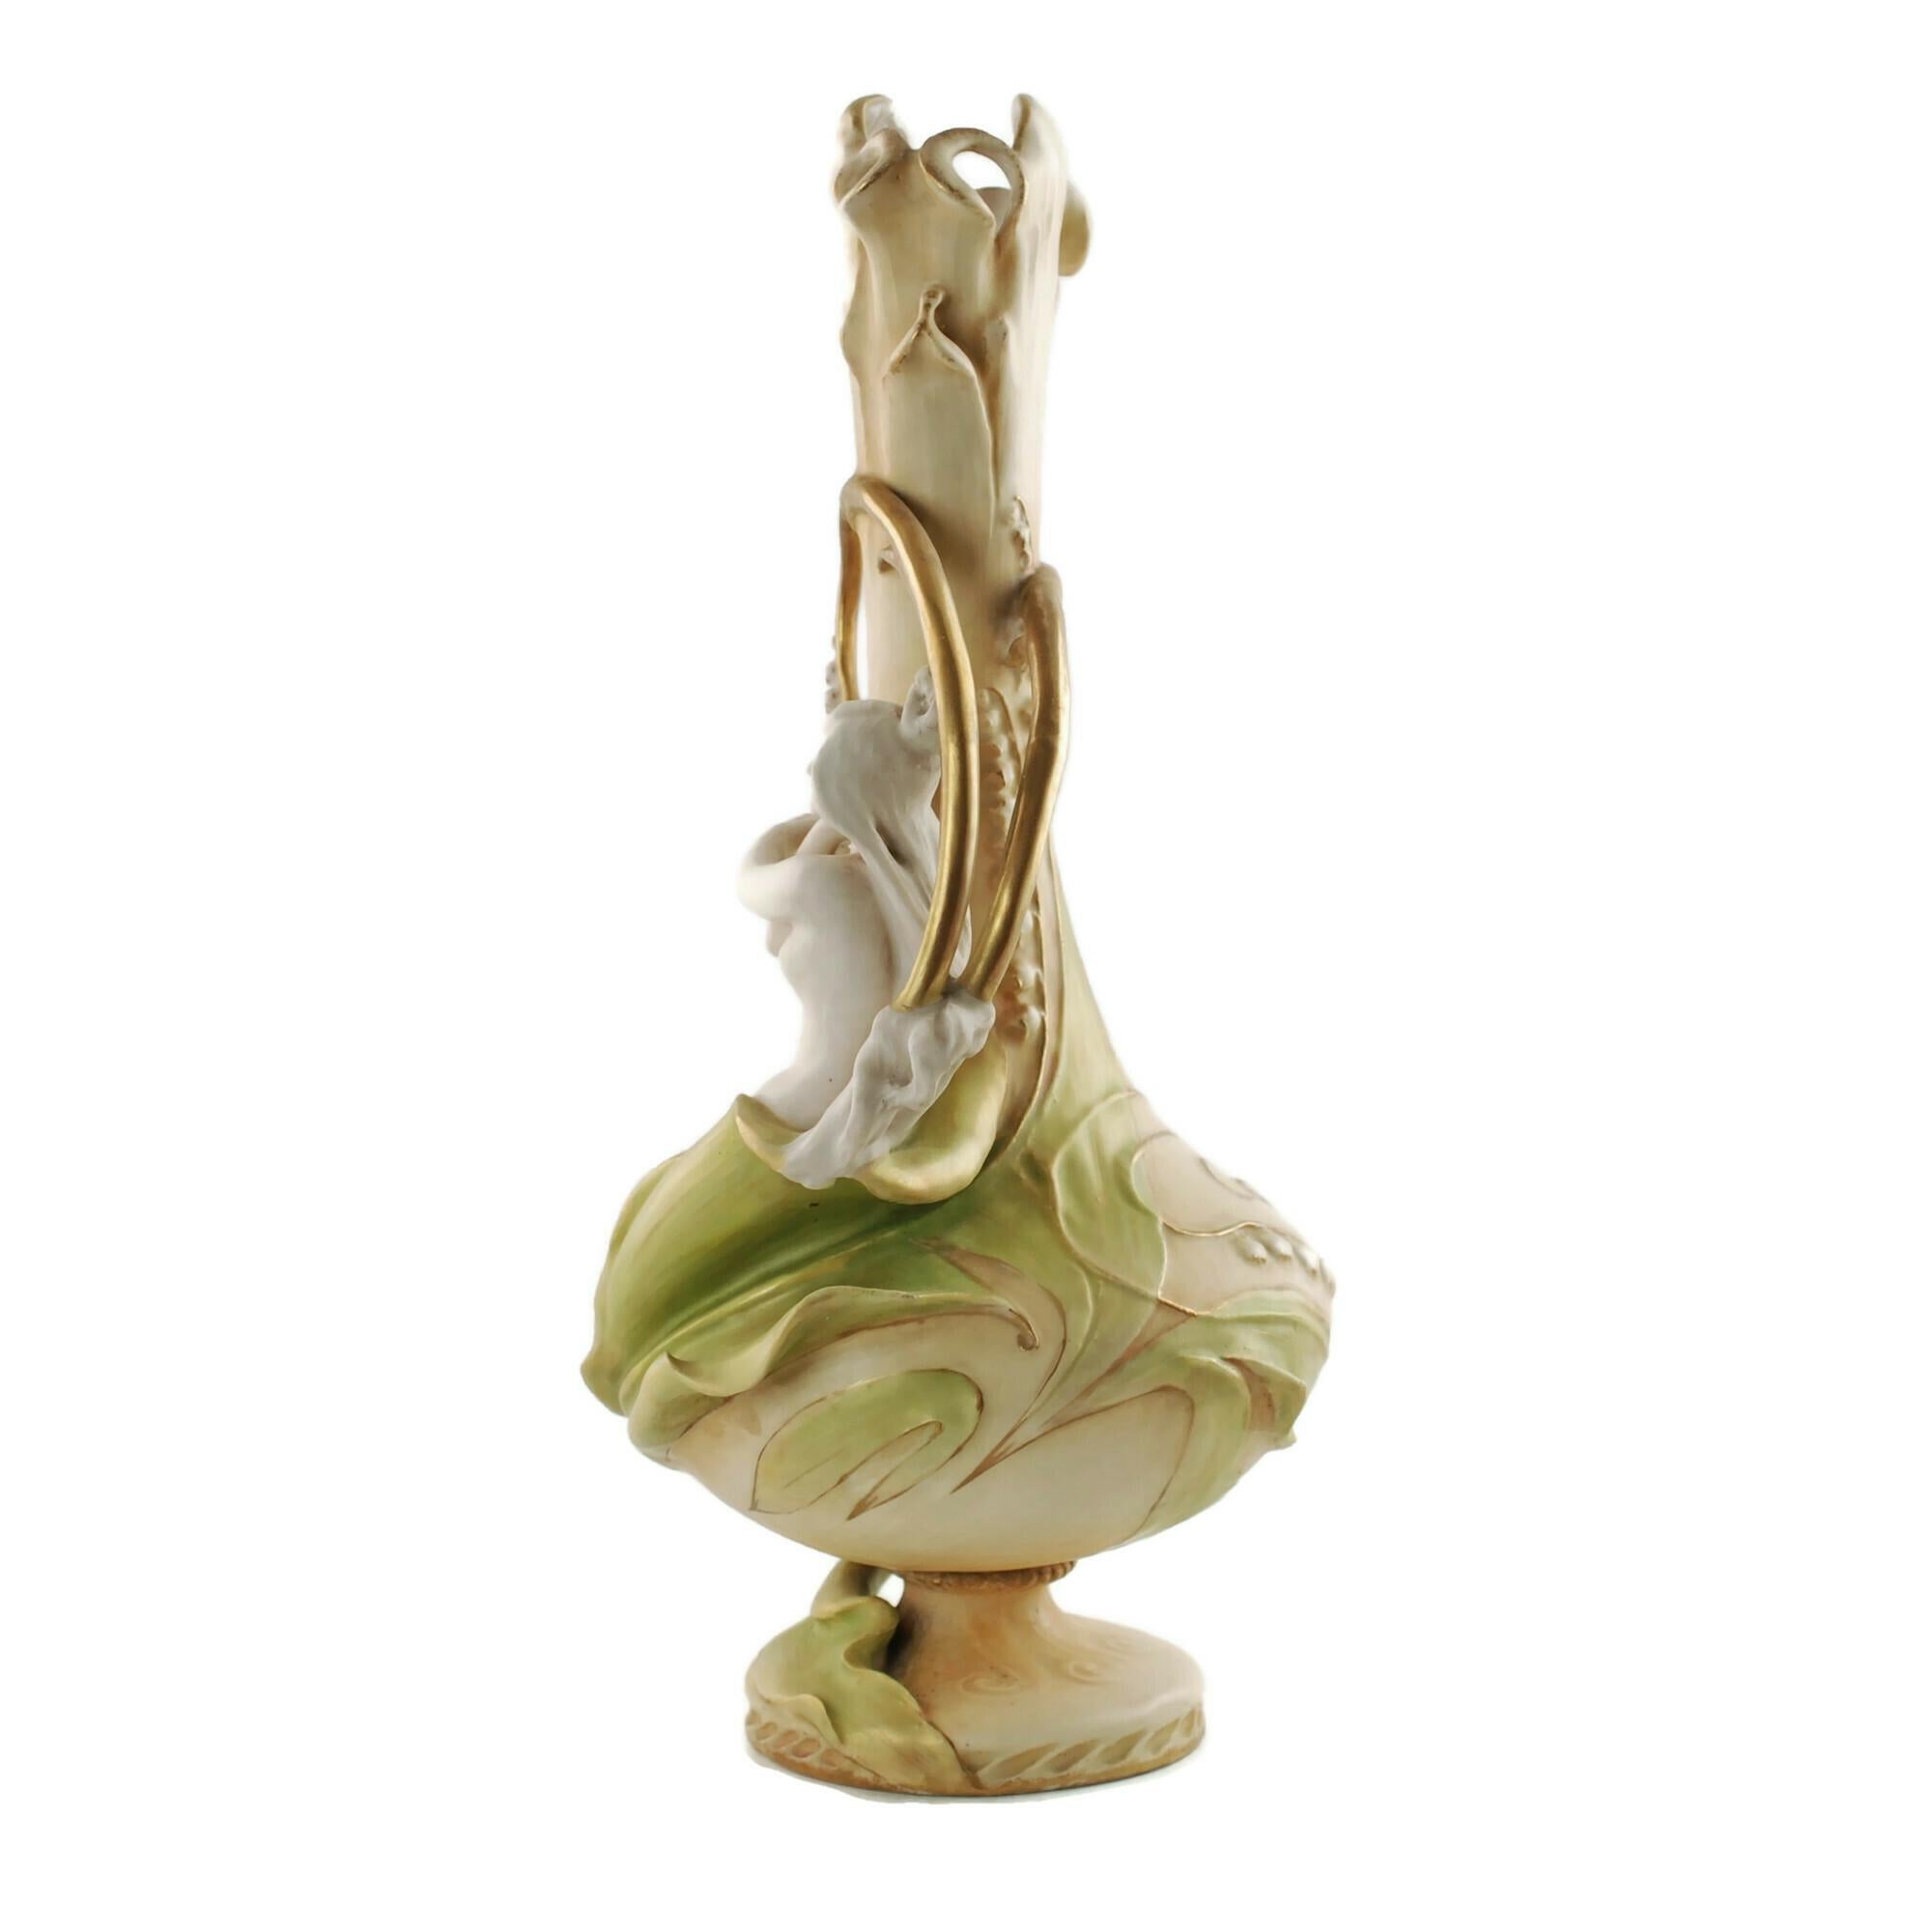 This late 19th century porcelain vase was designed by Eduard Stellmacher for Riessner, Stellmacher & Kessel Amphora of Turn-Teplitz, Bohemia. The piece has a Classic Art Nouveau form and features a dimensional nymph partially encased in the leaves